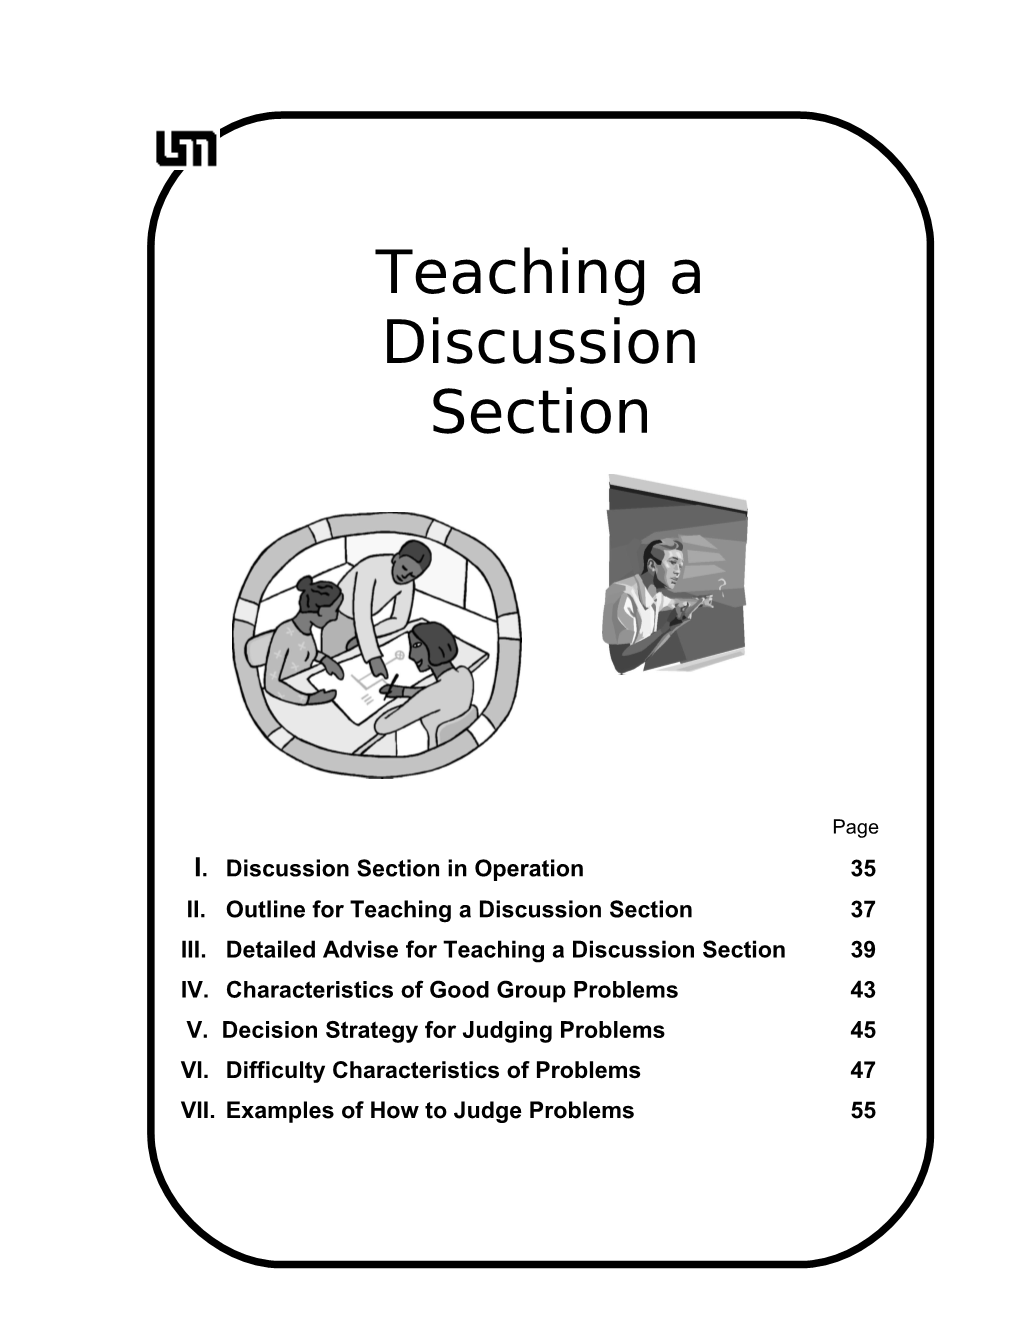 II. Outline for Teaching a Discussion Section 37